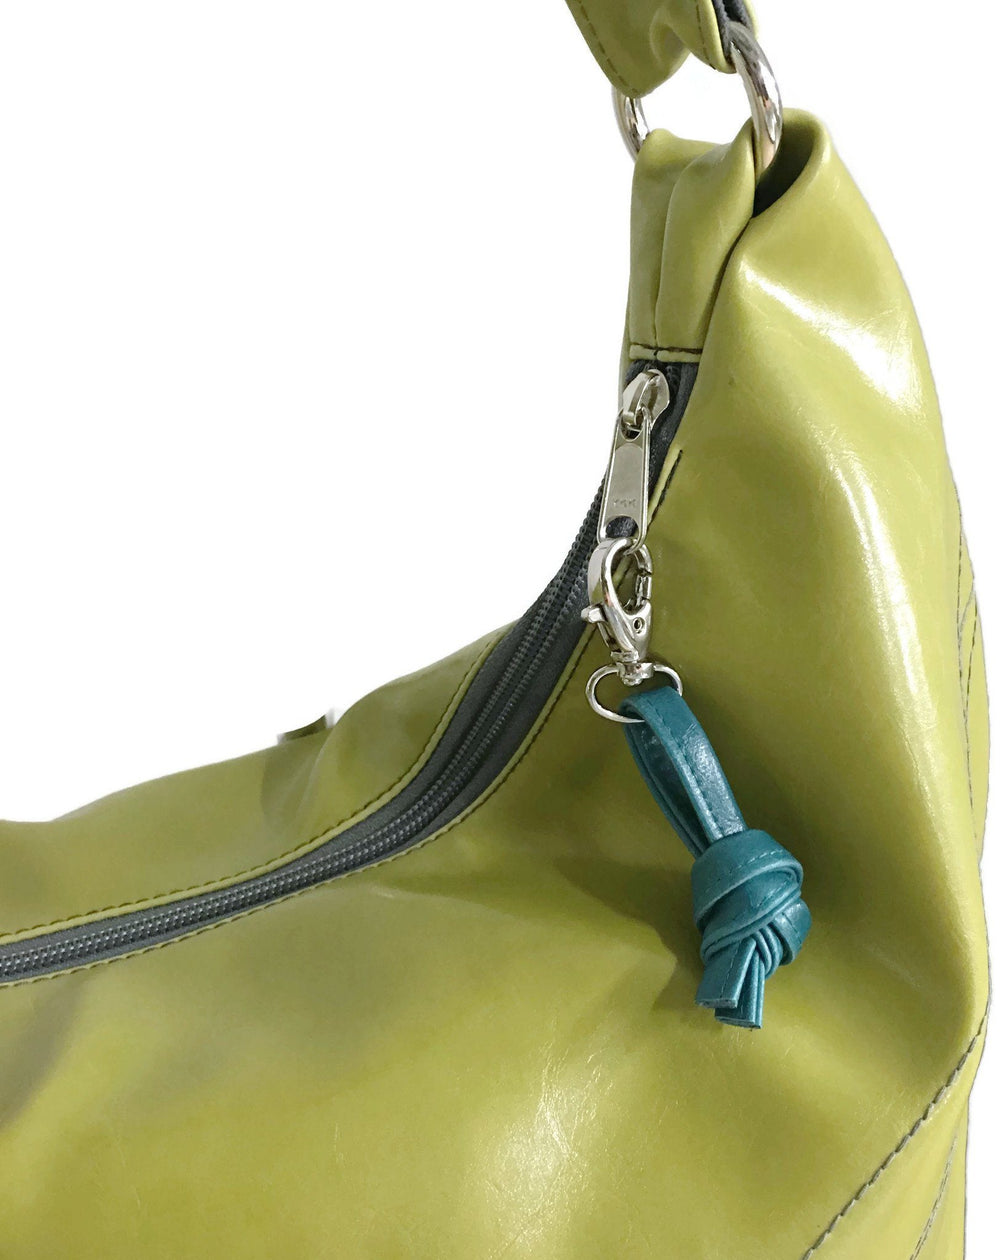 knotted bag charm hanging from hobo zipper pull French Knot Bag Charm